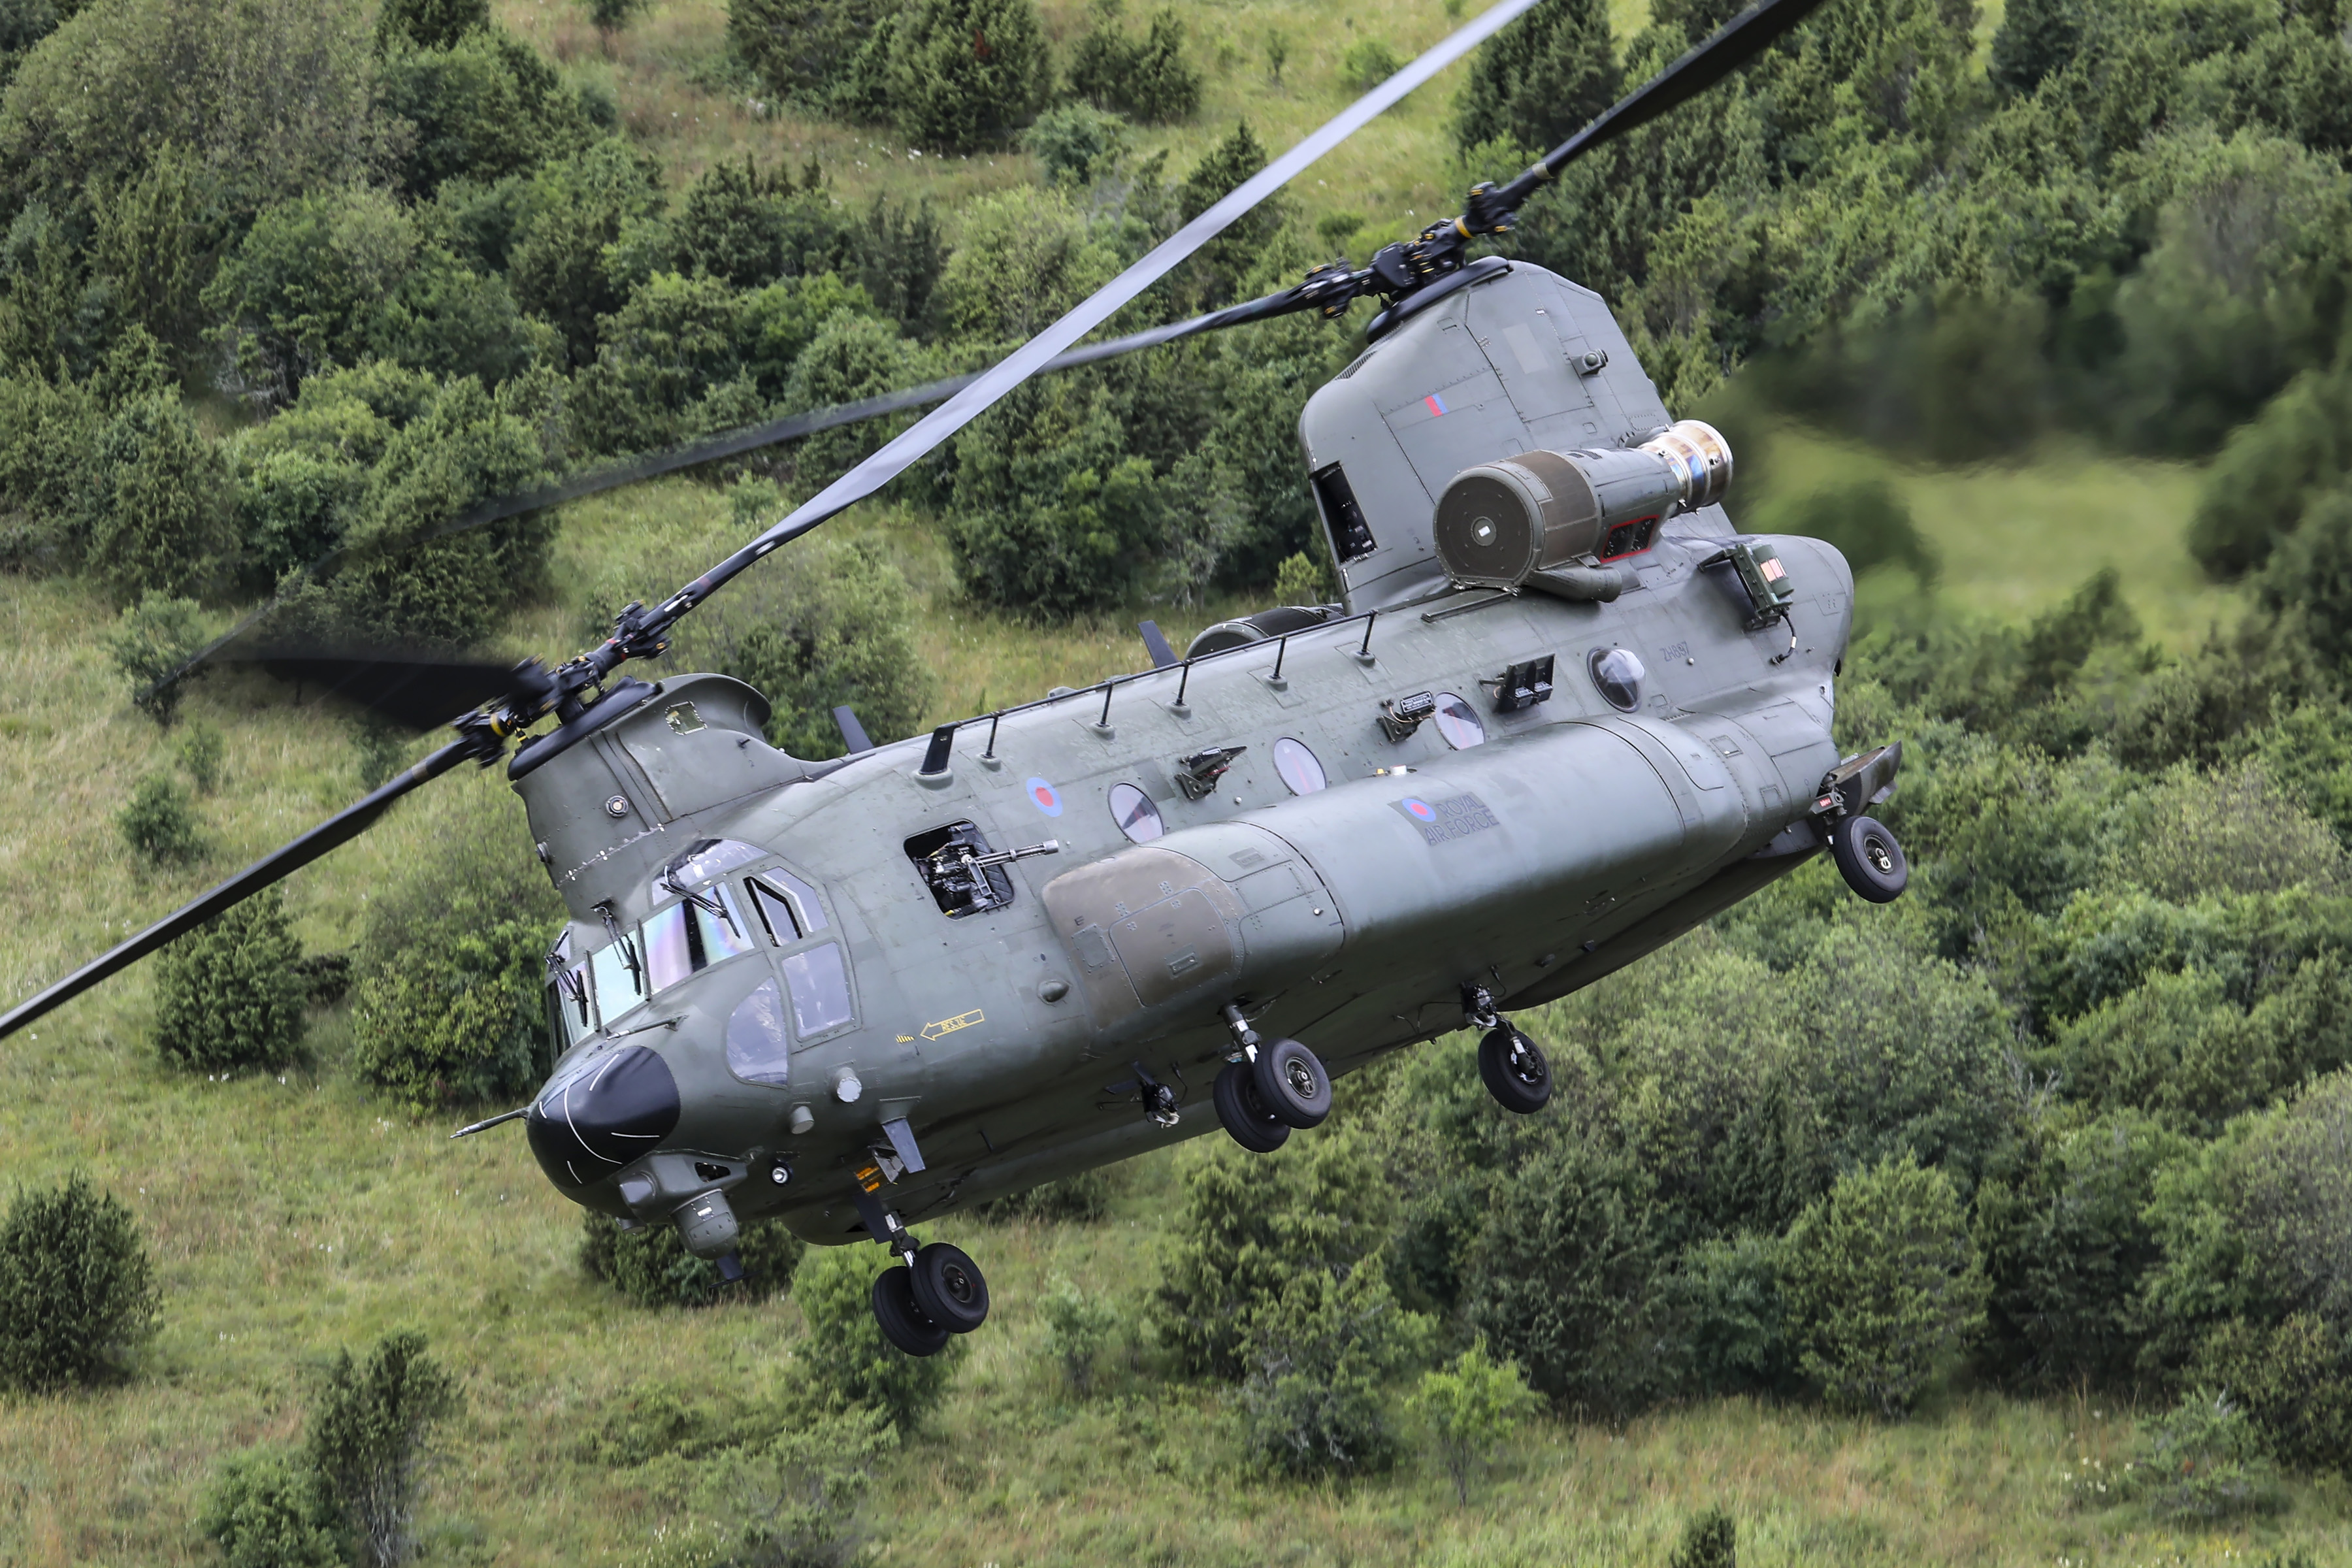 Image shows a RAF Chinook in flight over trees.